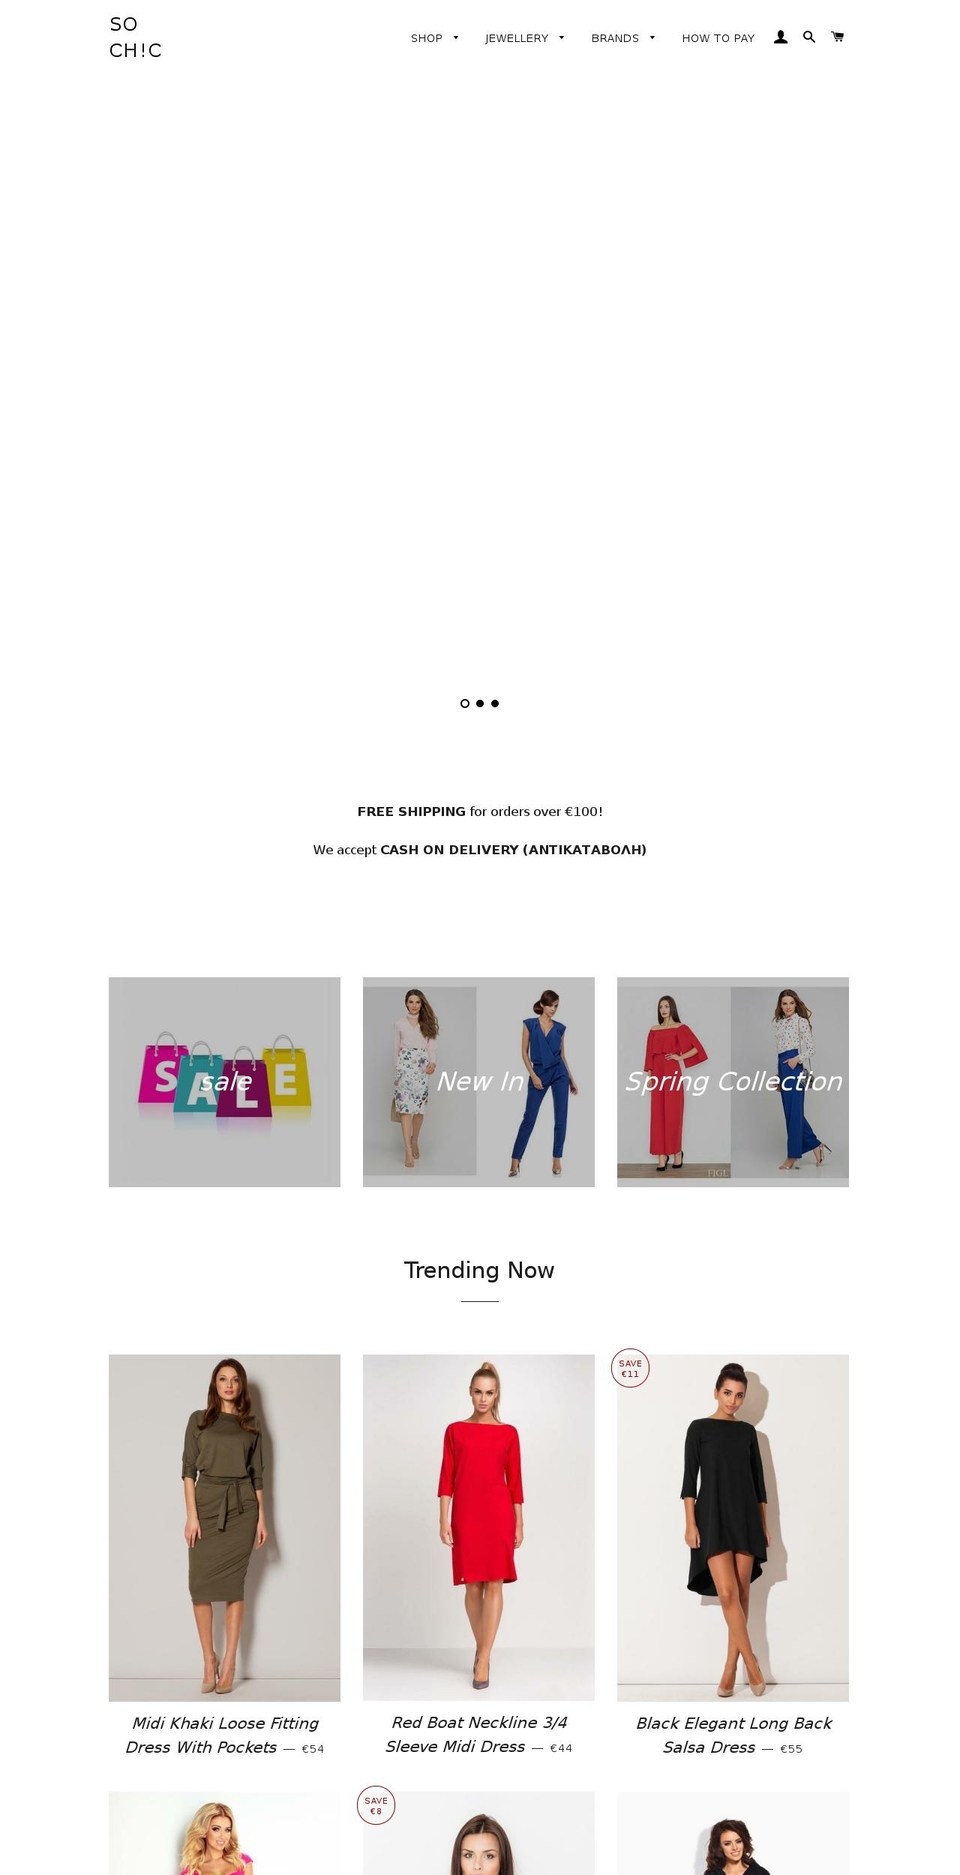 Brooklyn Shopify theme site example sochicboutique.net